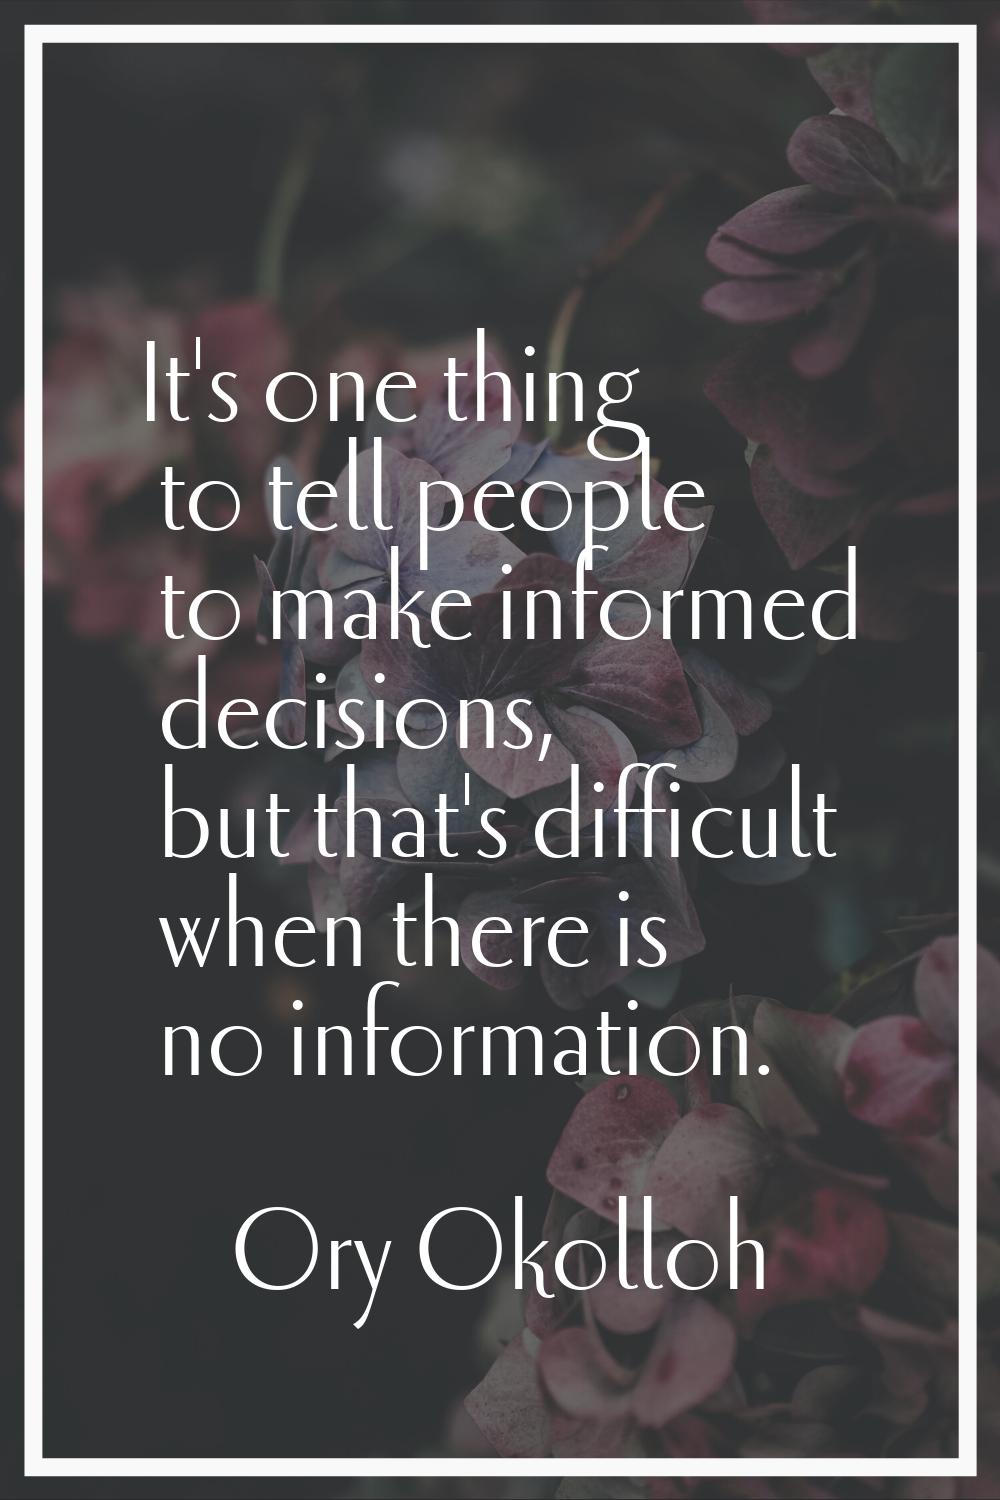 It's one thing to tell people to make informed decisions, but that's difficult when there is no inf